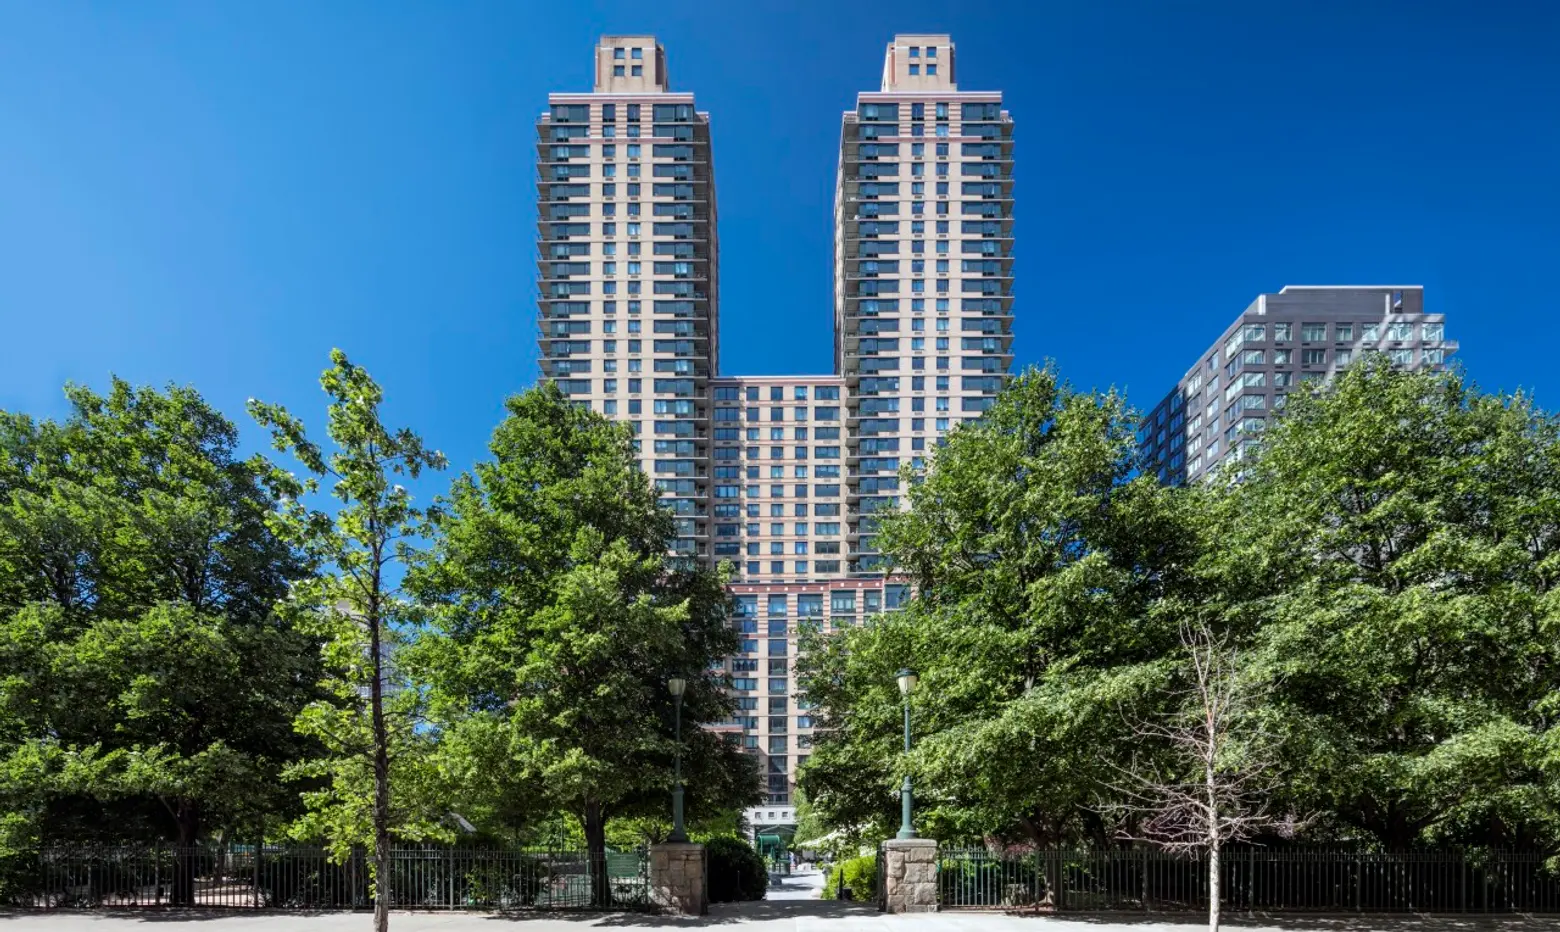 75 West End Avenue, West End Towers, NYC affordable housing, Upper West Side luxury rentals